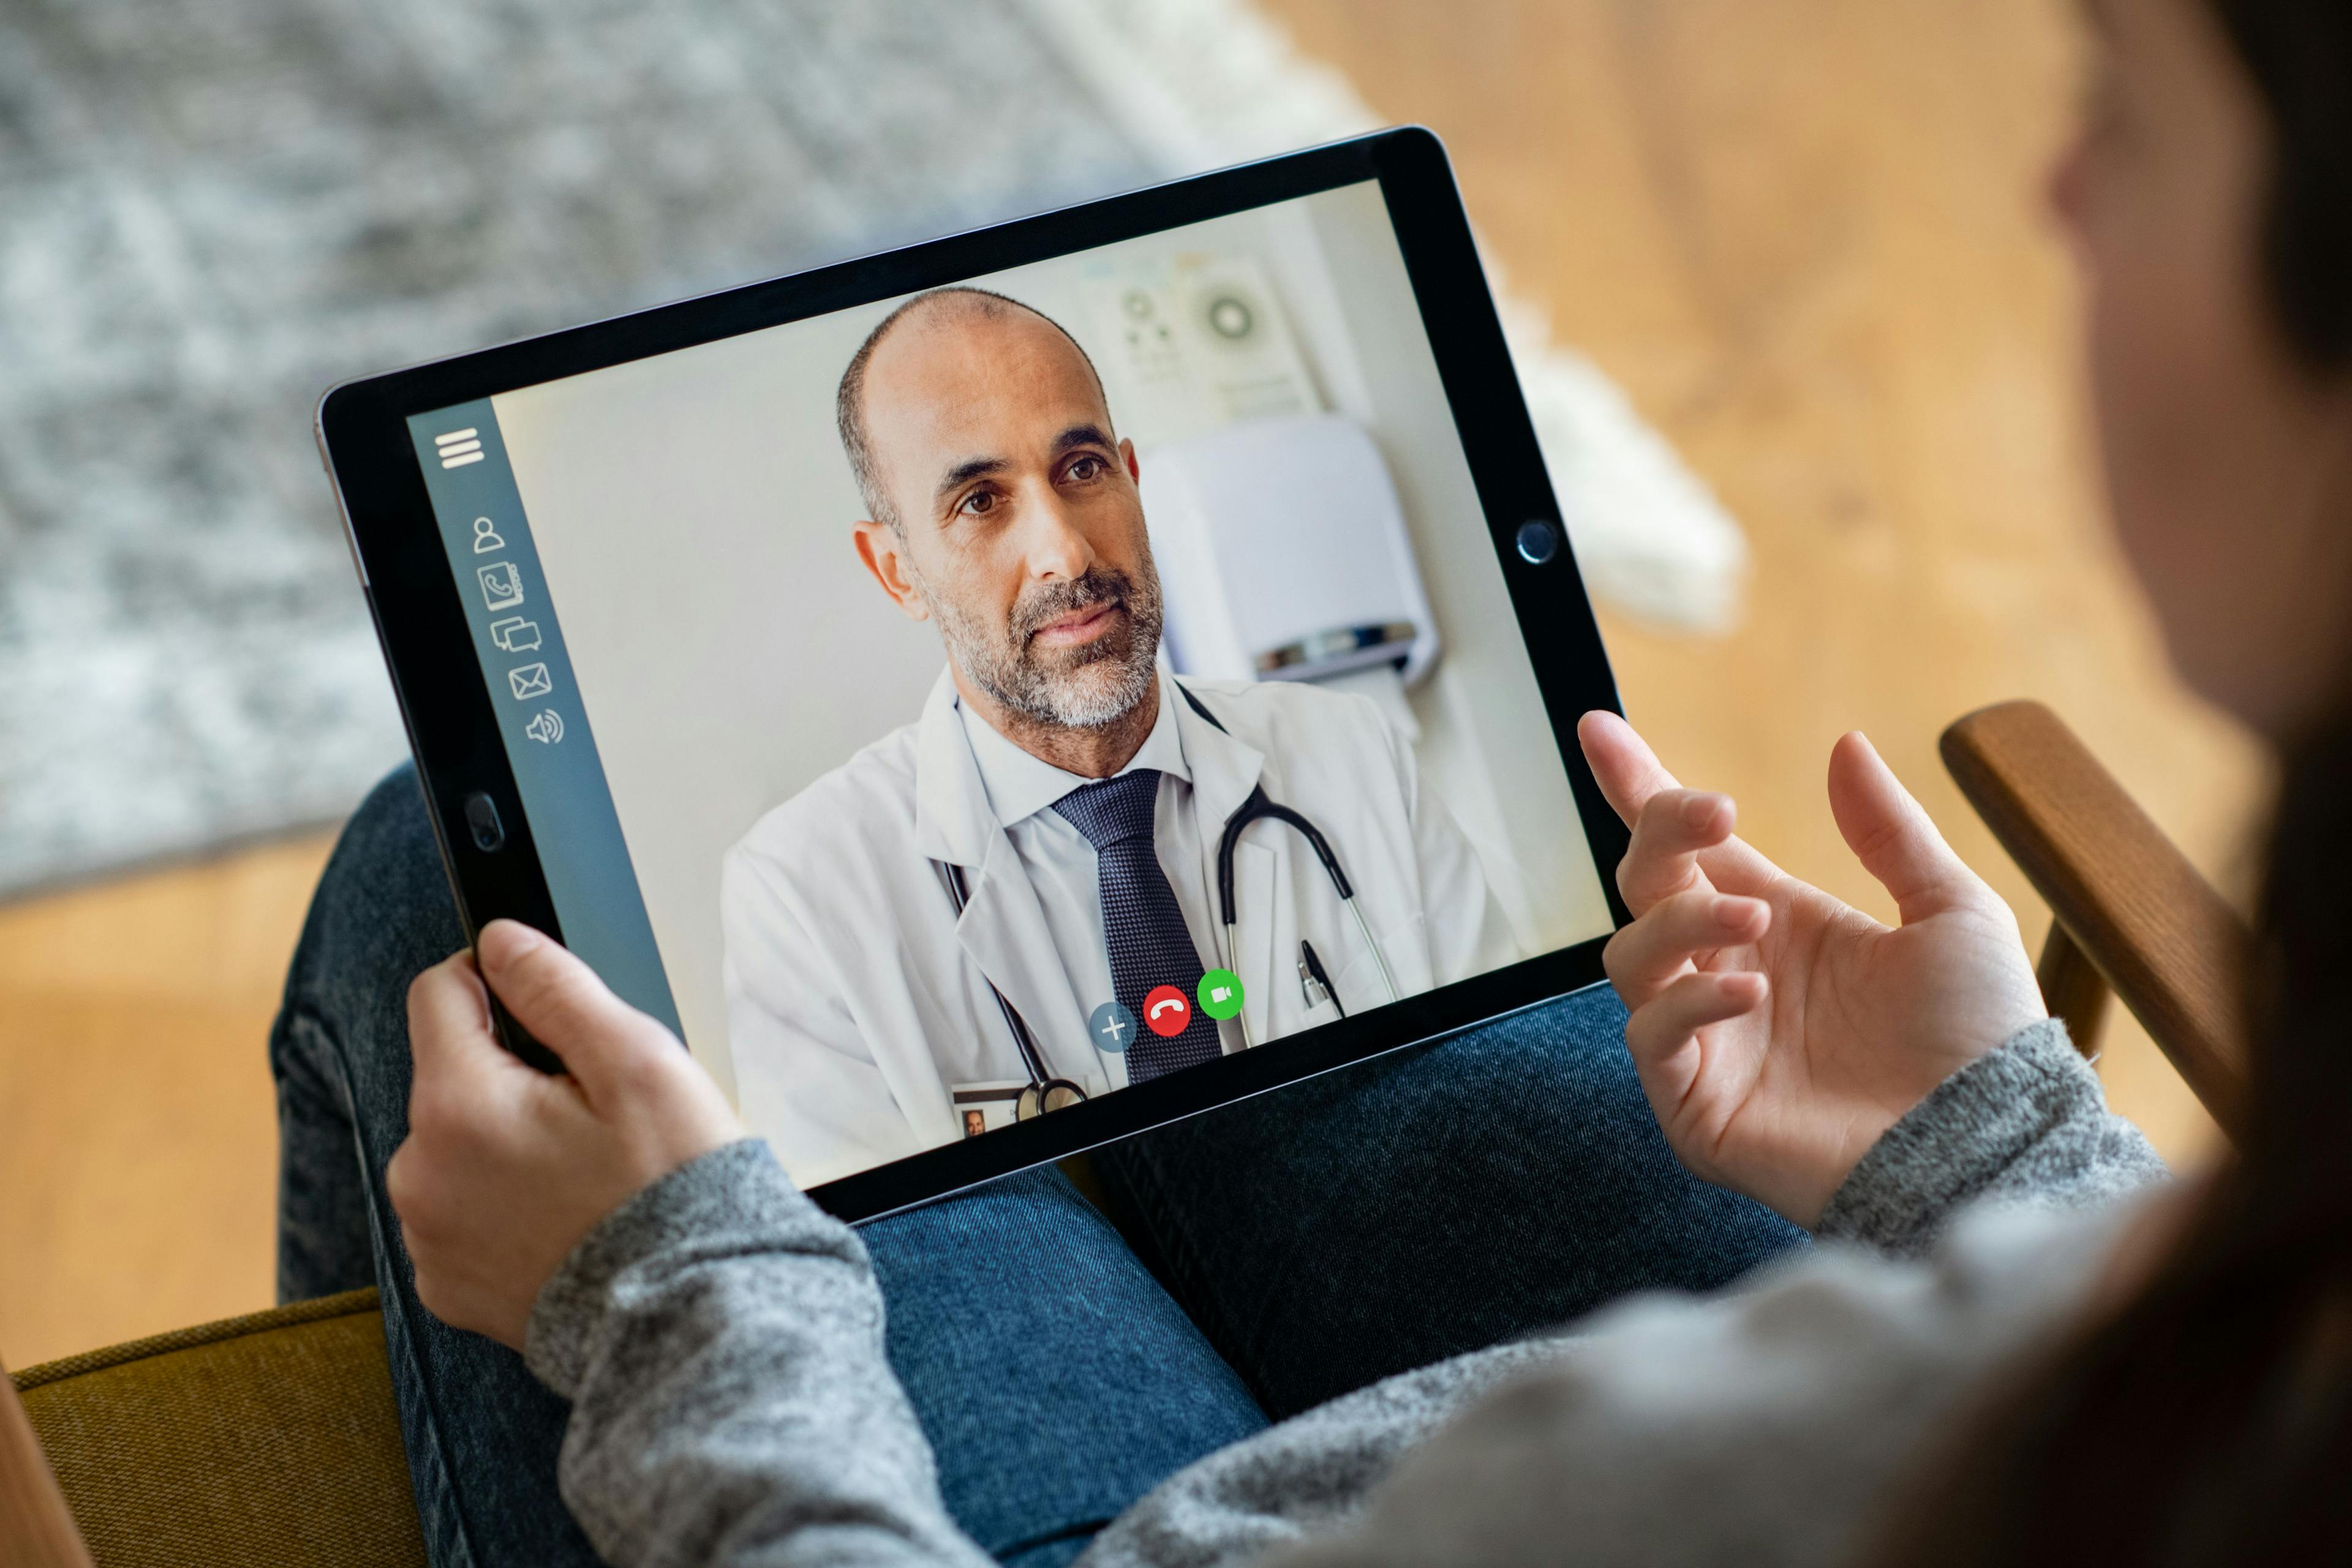 Patient and doctor on telehealth appointment